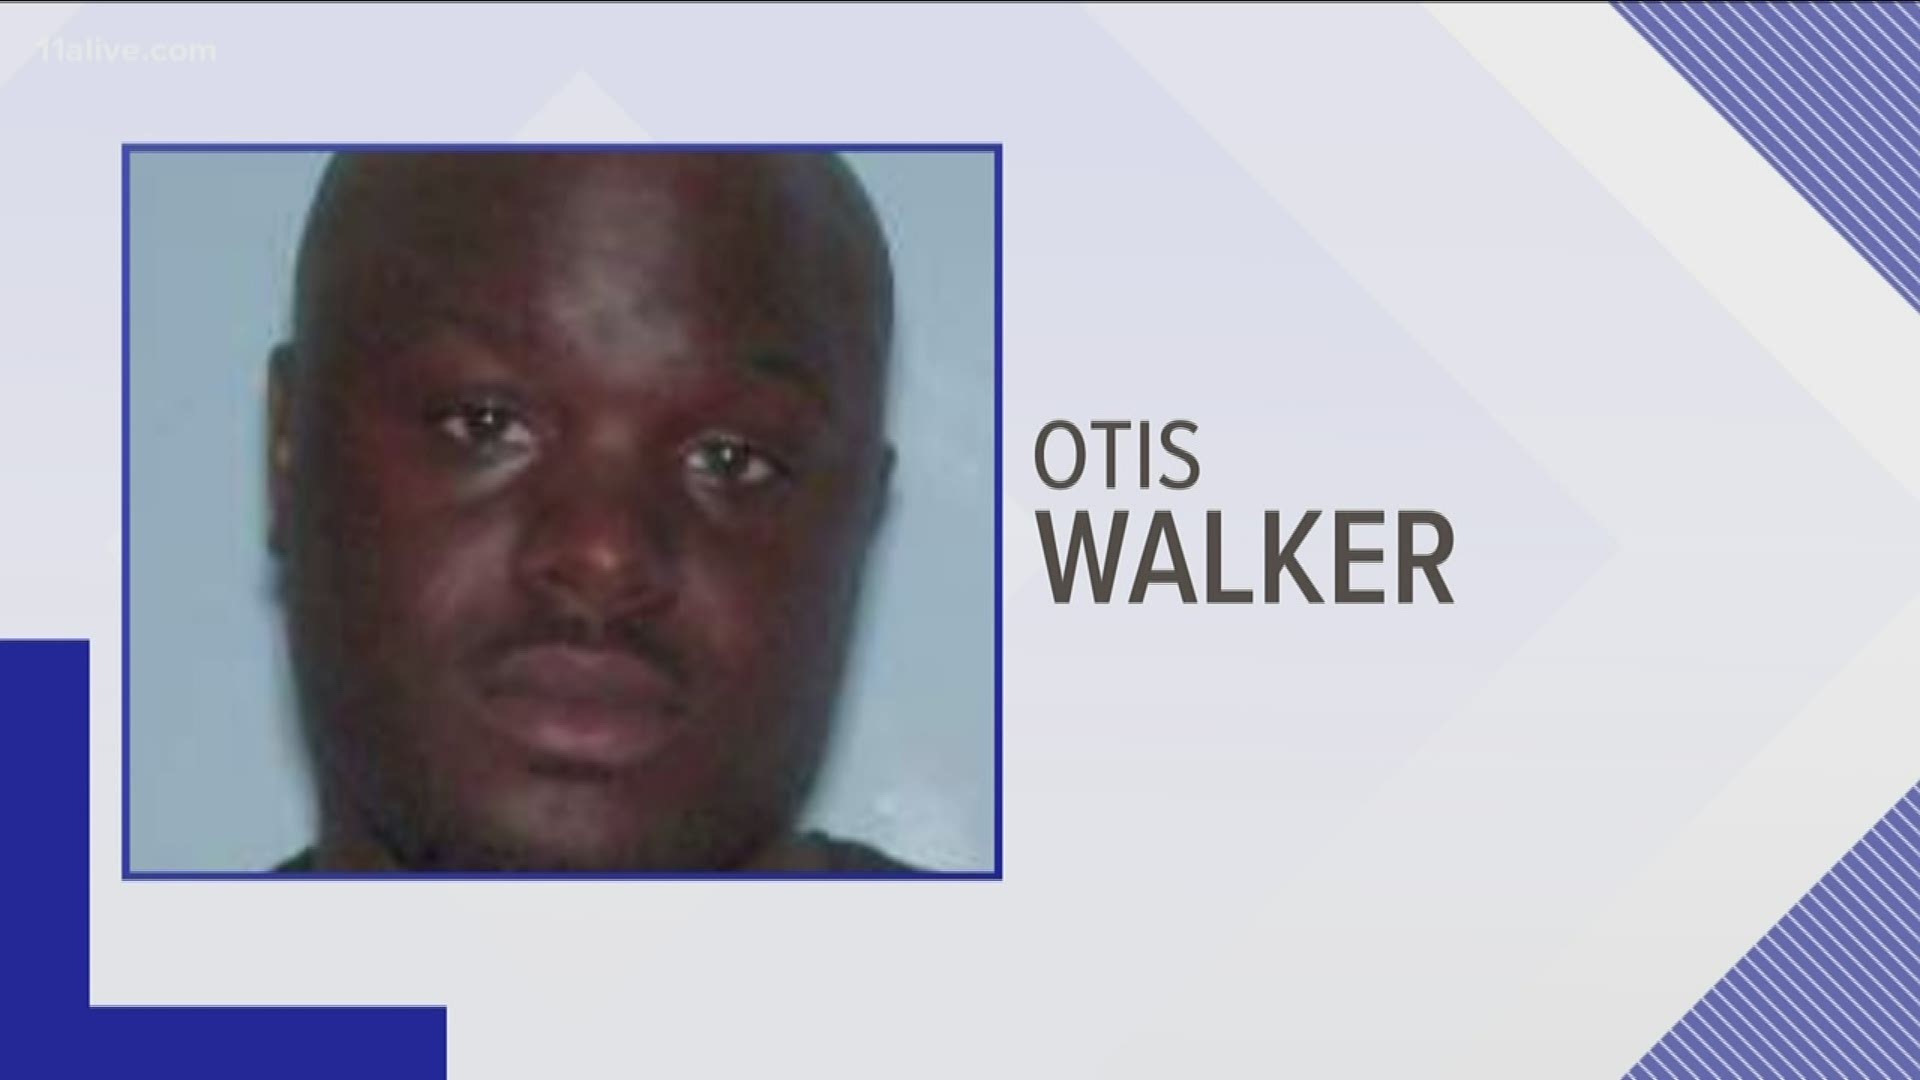 They're looking for 27-year-old Otis Walker, whom they consider armed and dangerous. He fled the scene of the shooting.